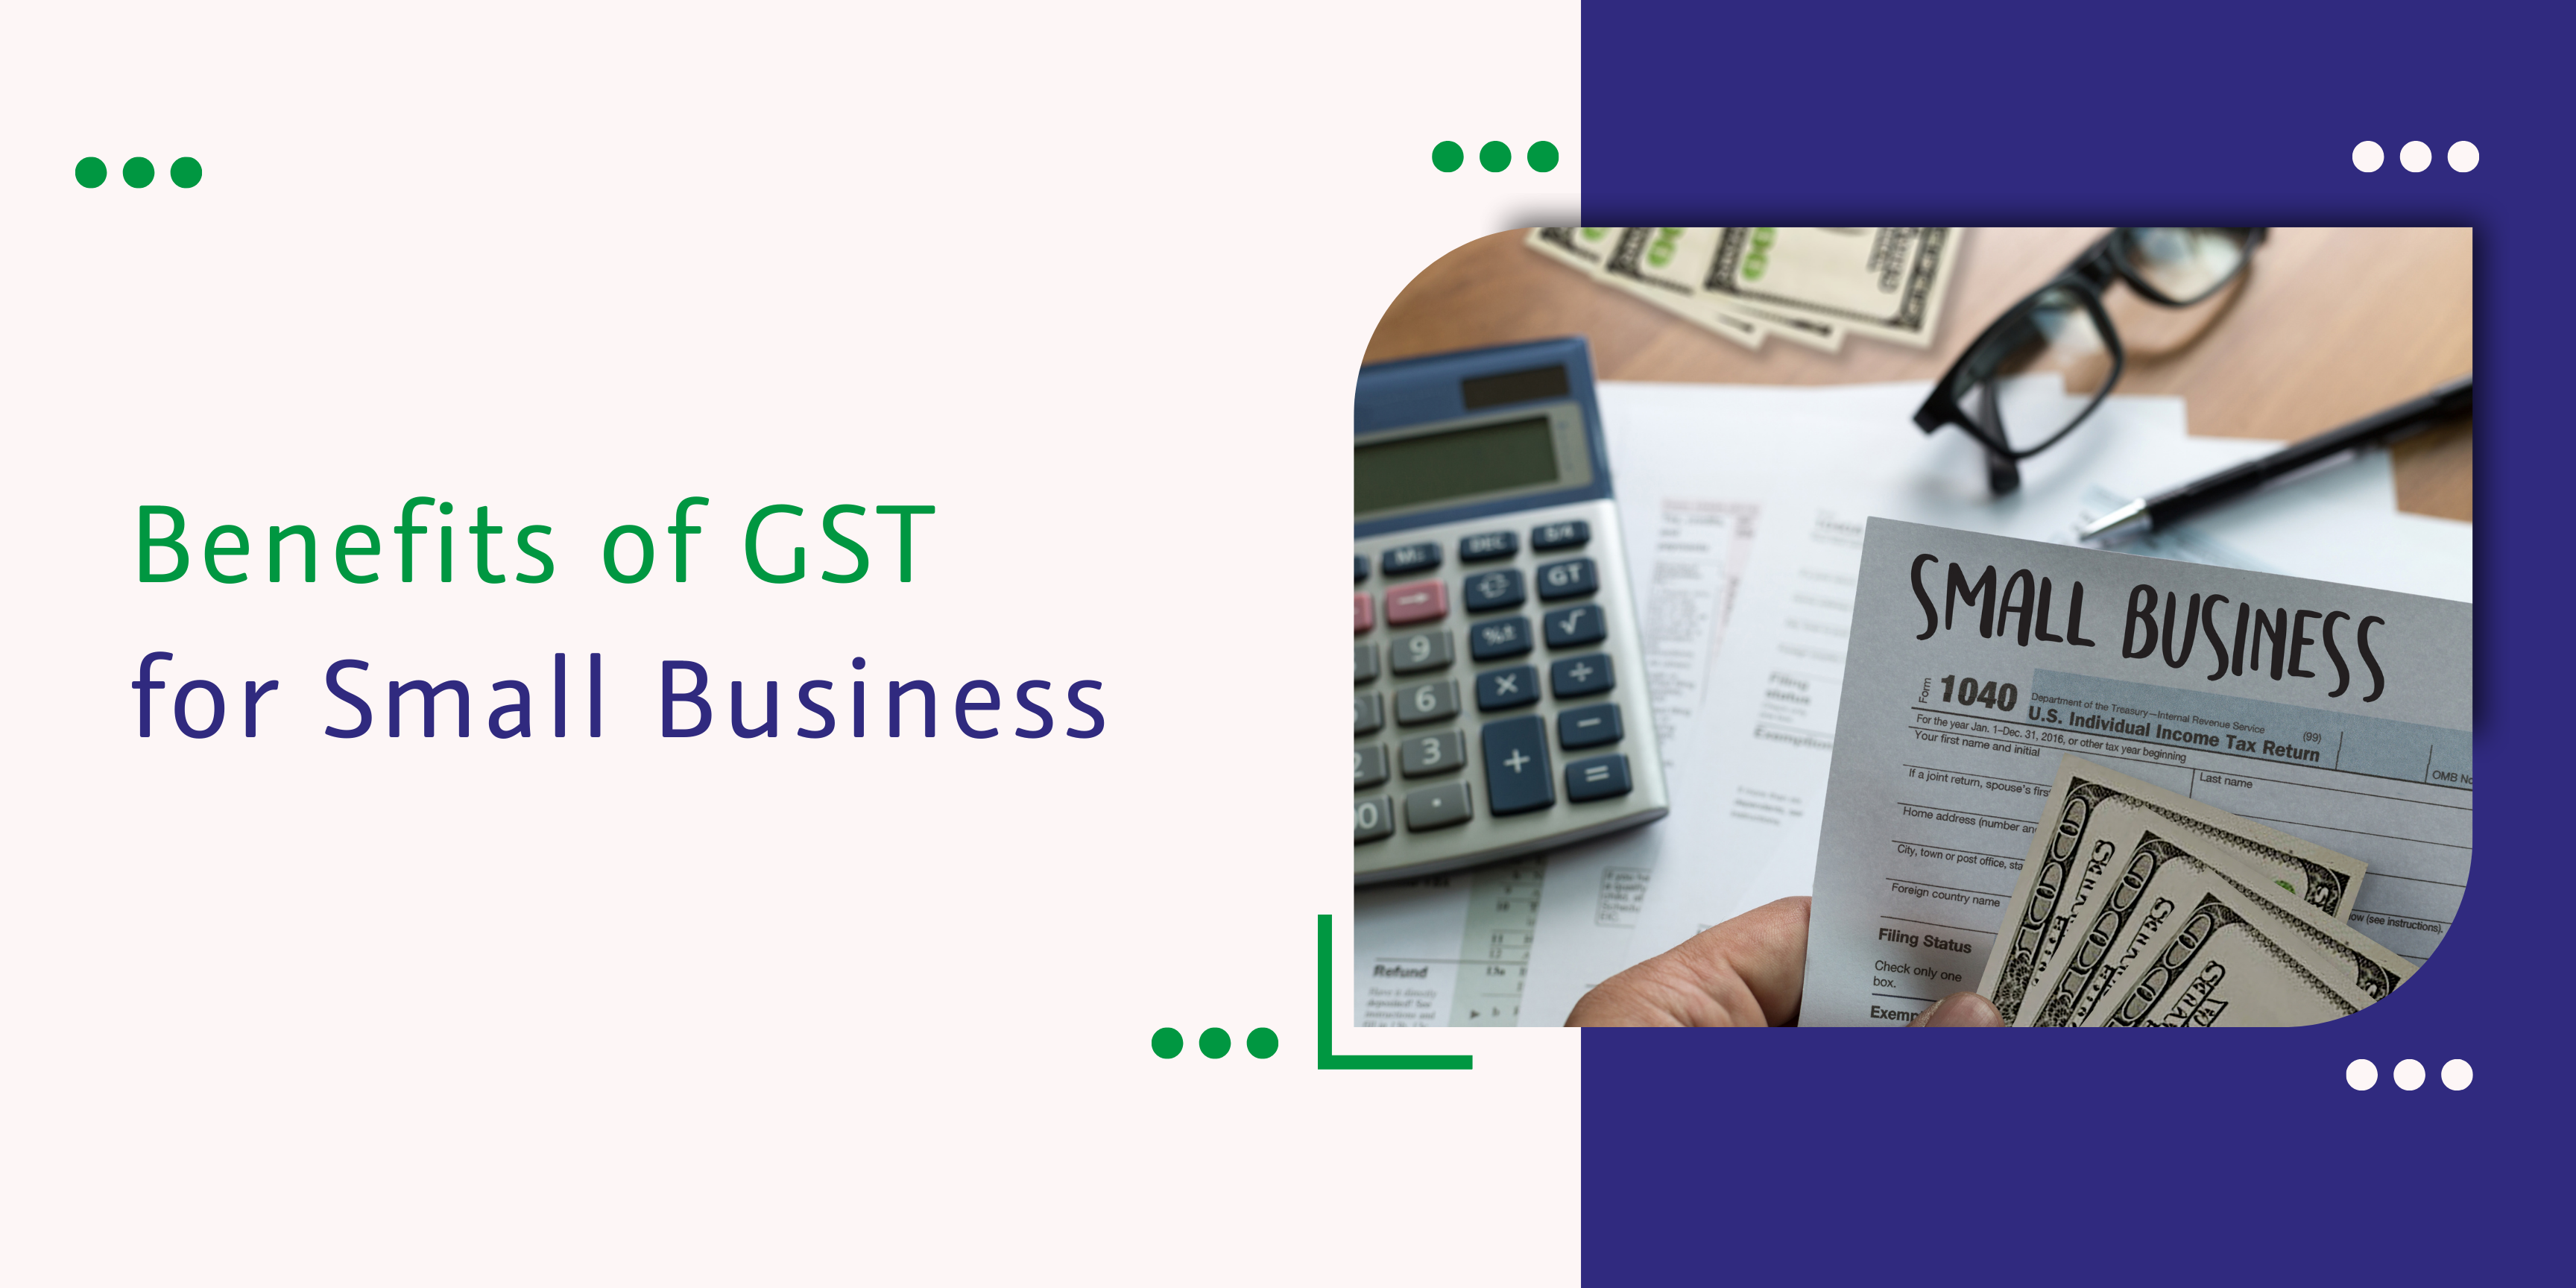 Benefits of GST for Small Business